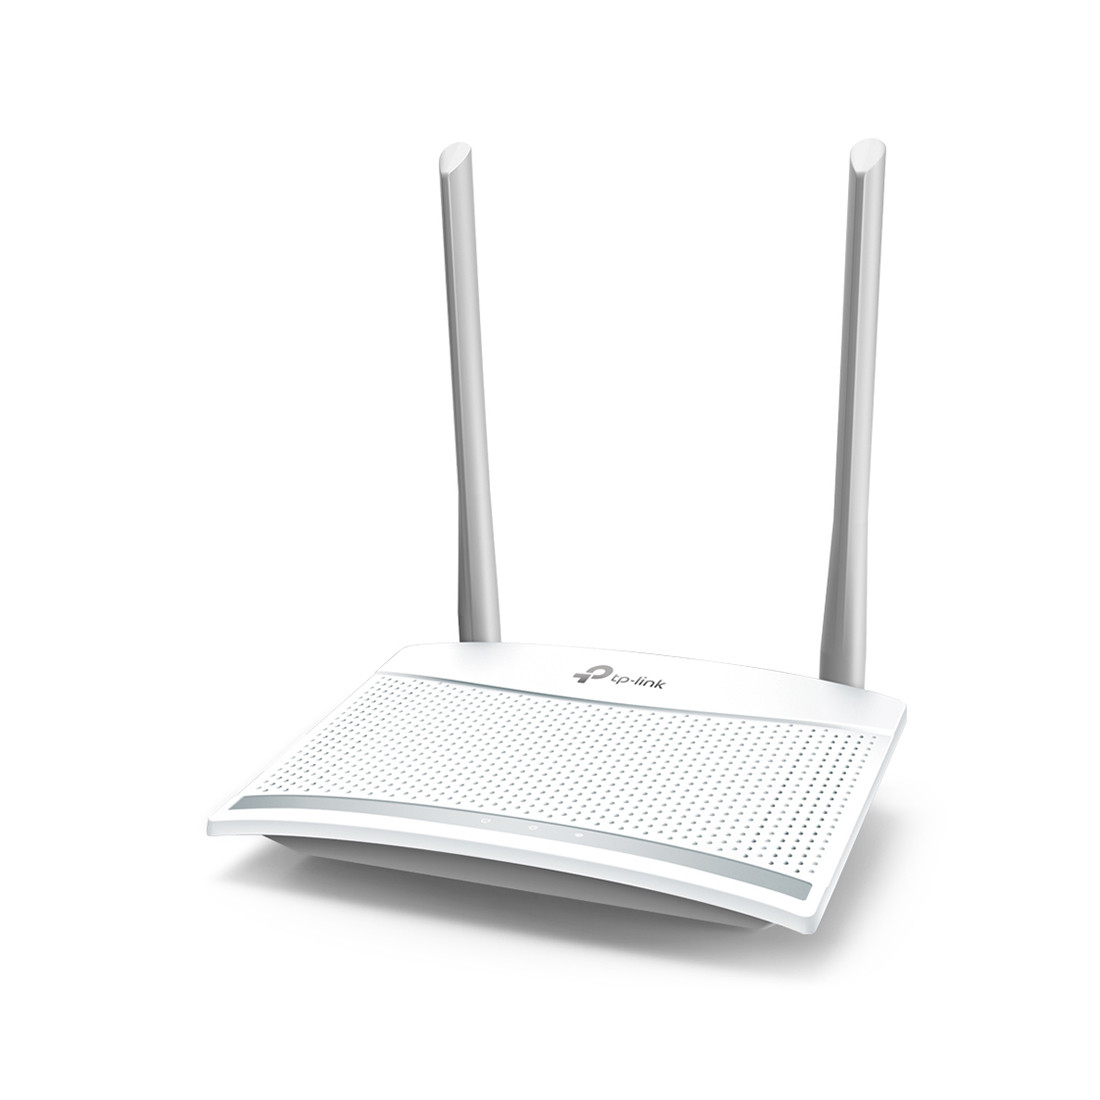 Маршрутизатор TP-Link TL-WR820N (Маршрутизаторы) - фото 1 - id-p115007369